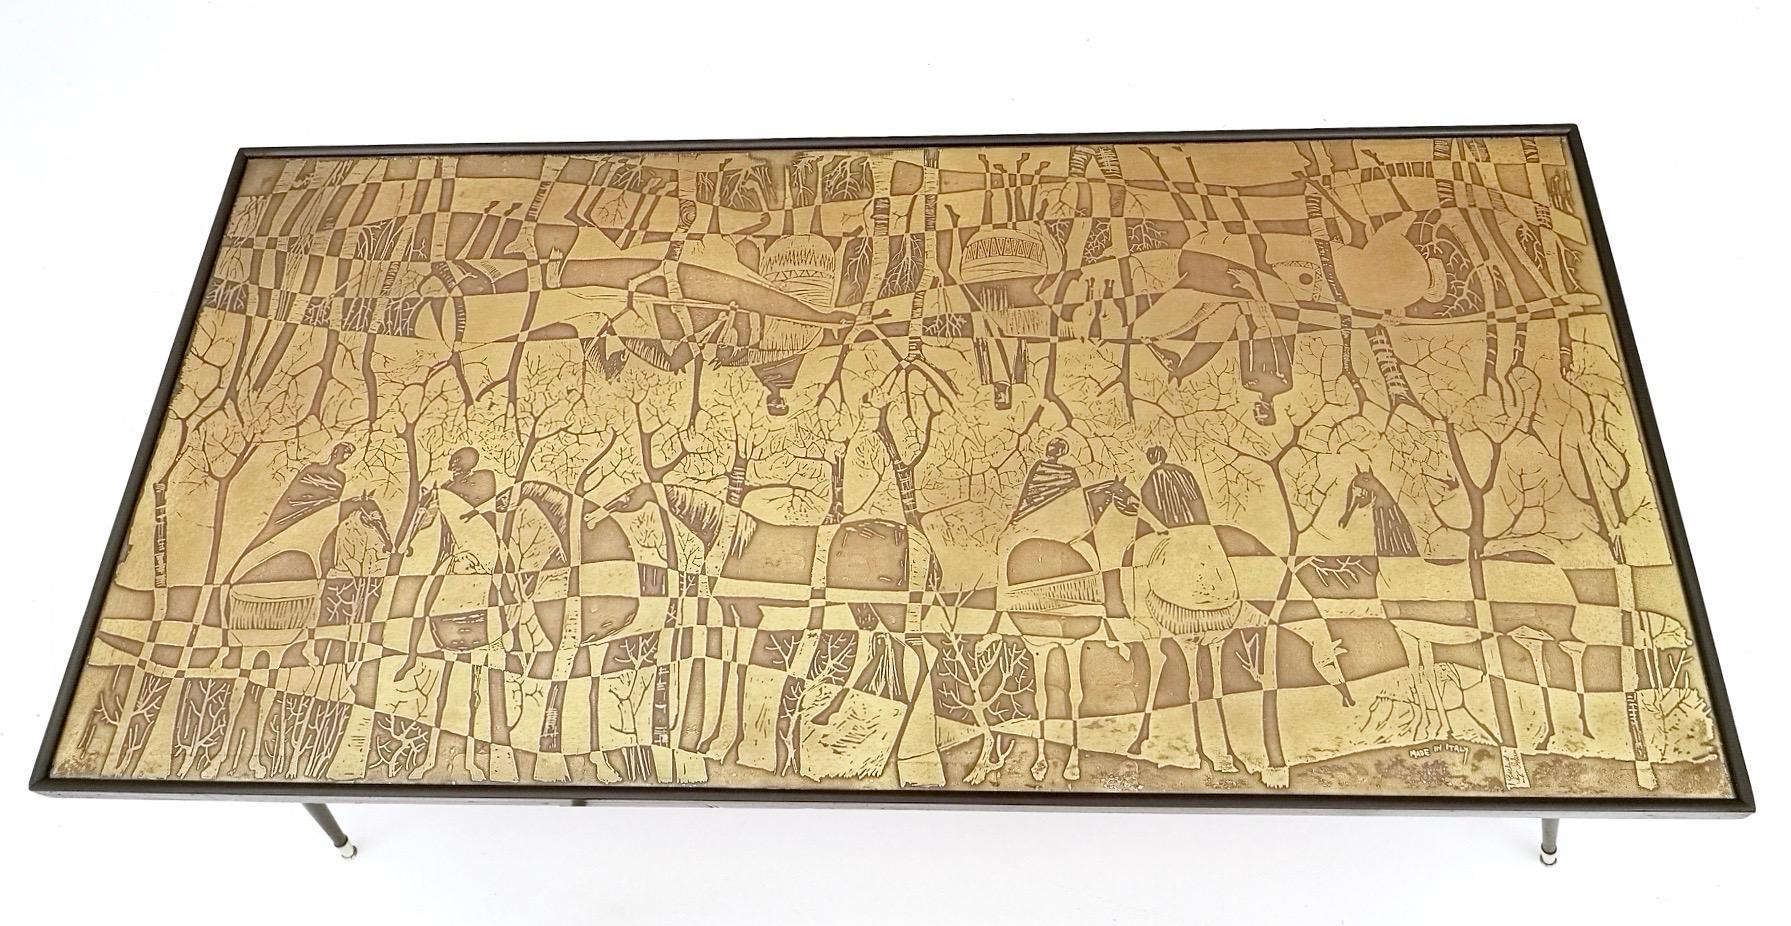 Elegant Vintage Rectangular Etched Brass Coffee Table by G.Urs, Italy For Sale 1